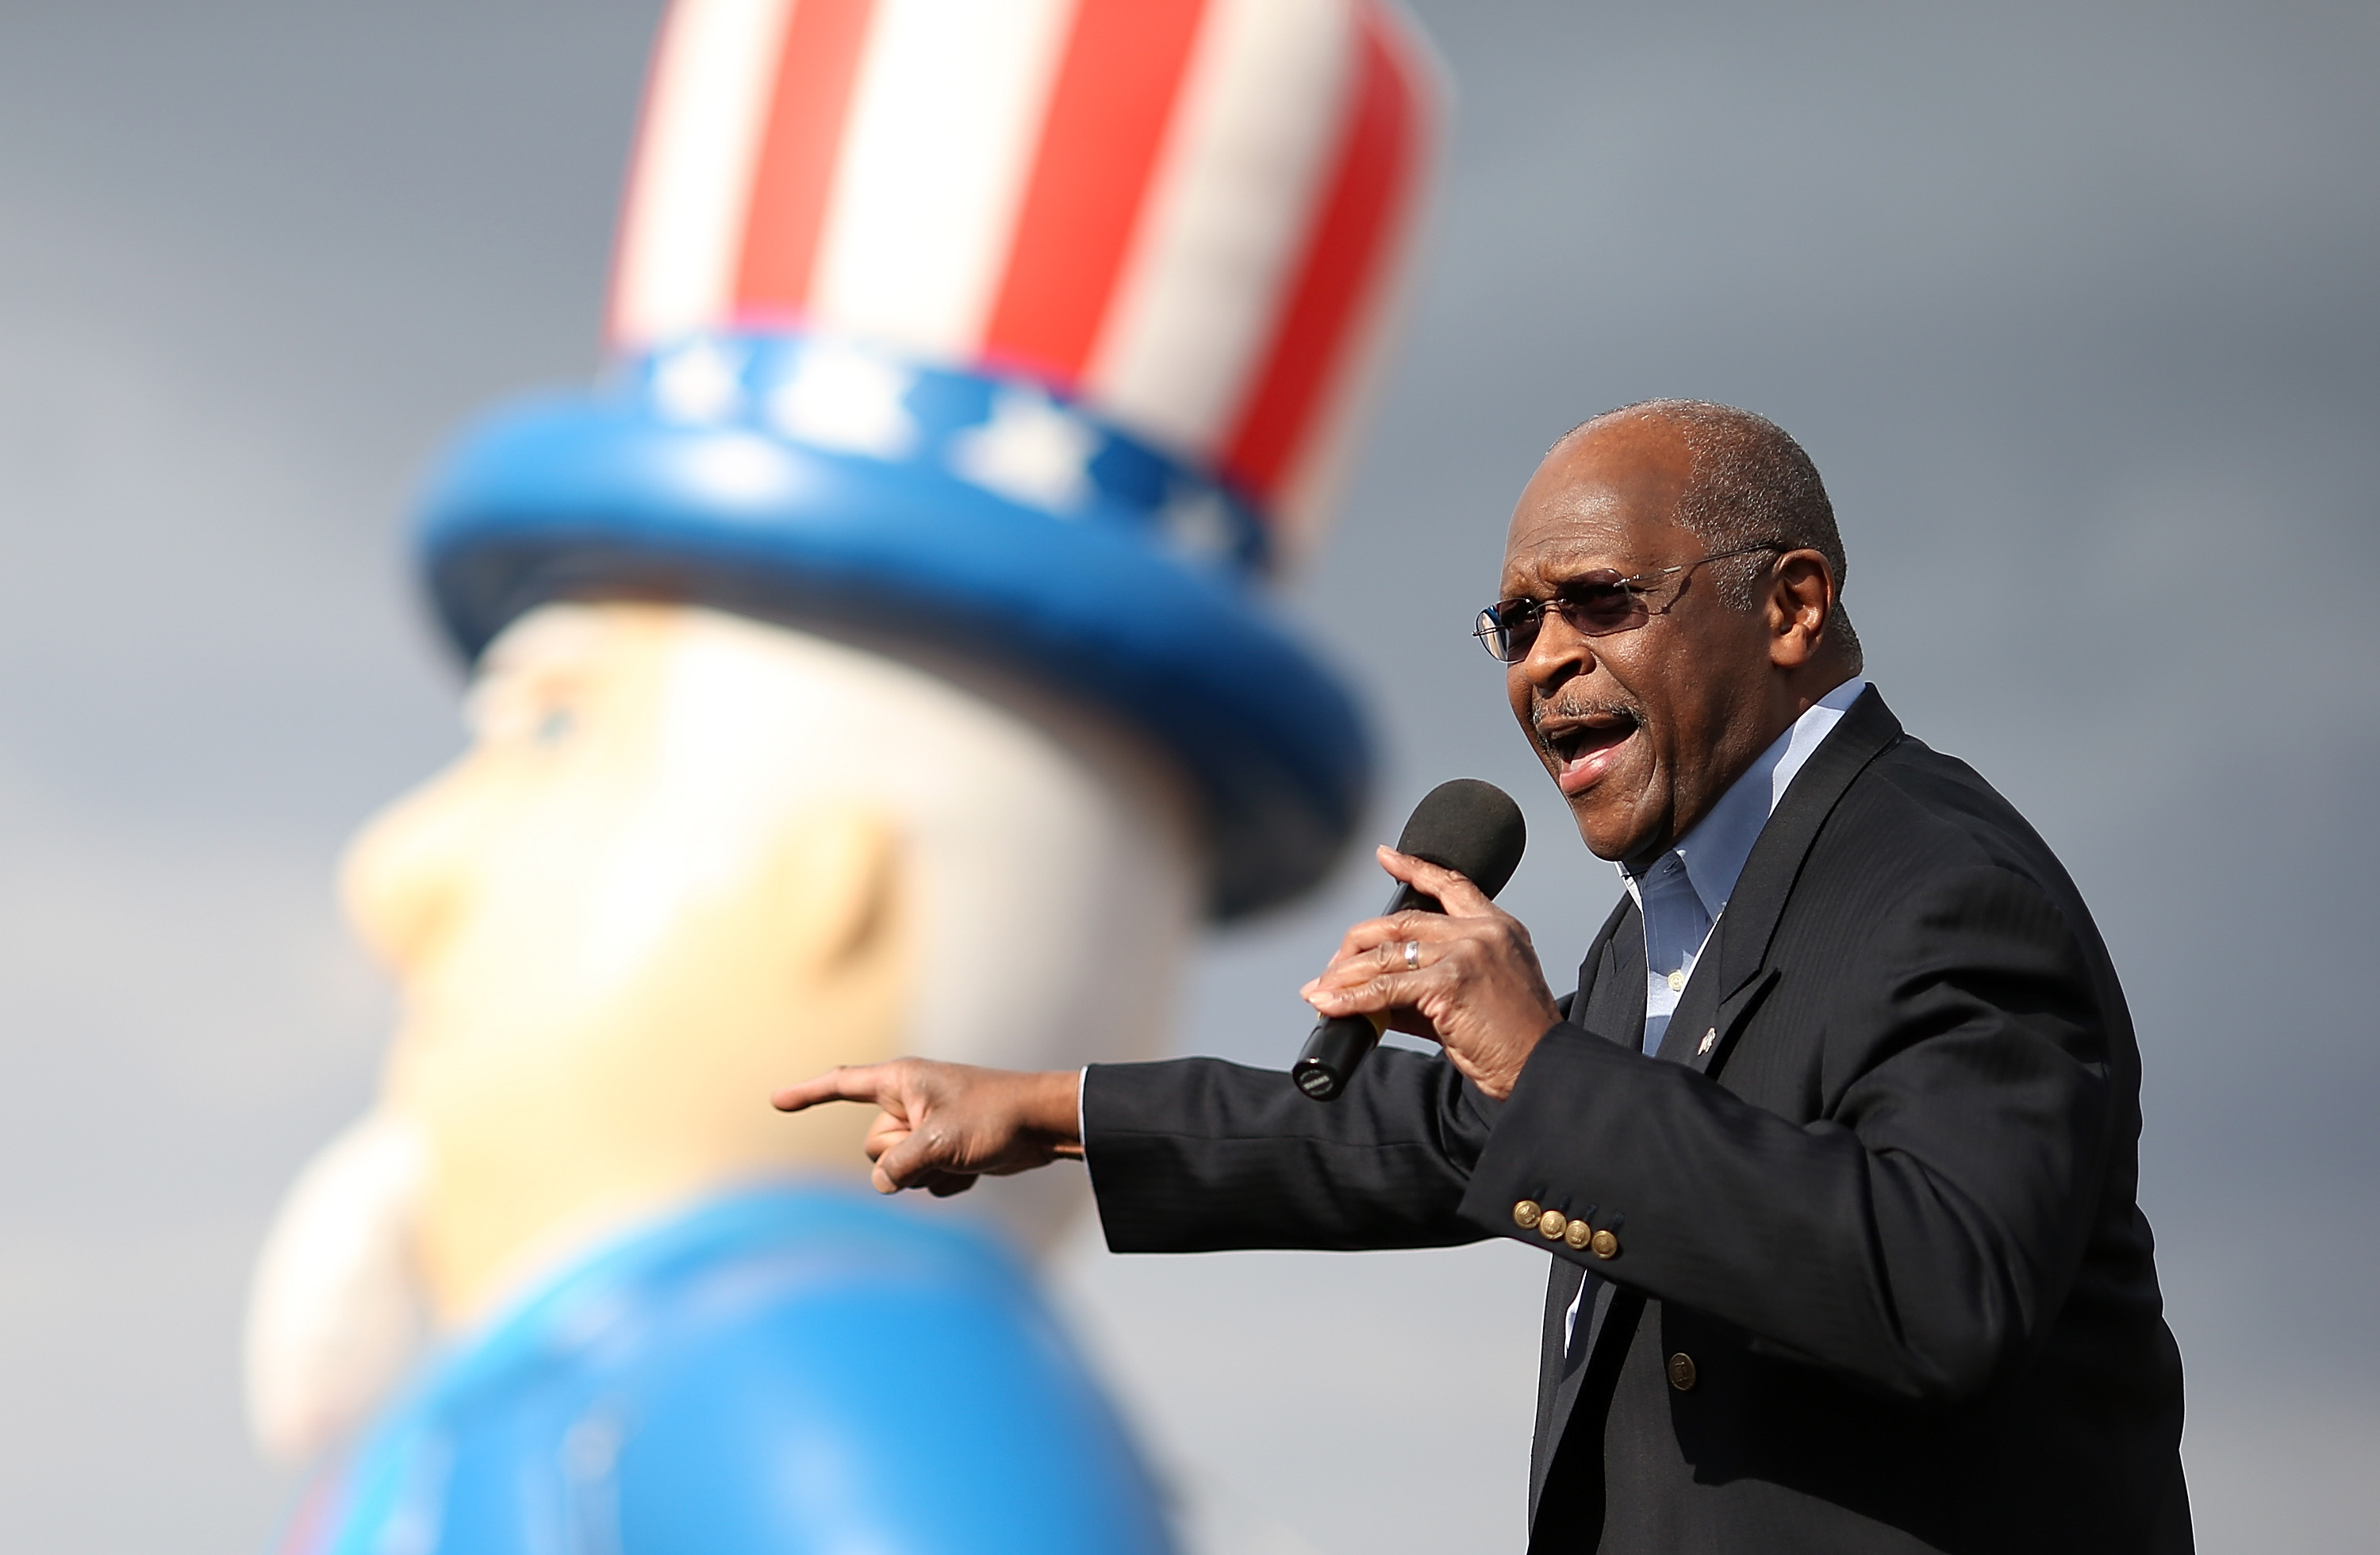 RENO, NV - JULY 23: Former Republican presidential candidate Herman Cain speaks during an American For Prosperity rally on July 23, 2012 in Reno, Nevada. Hundreds of people attended an Americans For Prosperity rally to see former Republican presidential candidate speak. (Photo by Justin Sullivan/Getty Images)